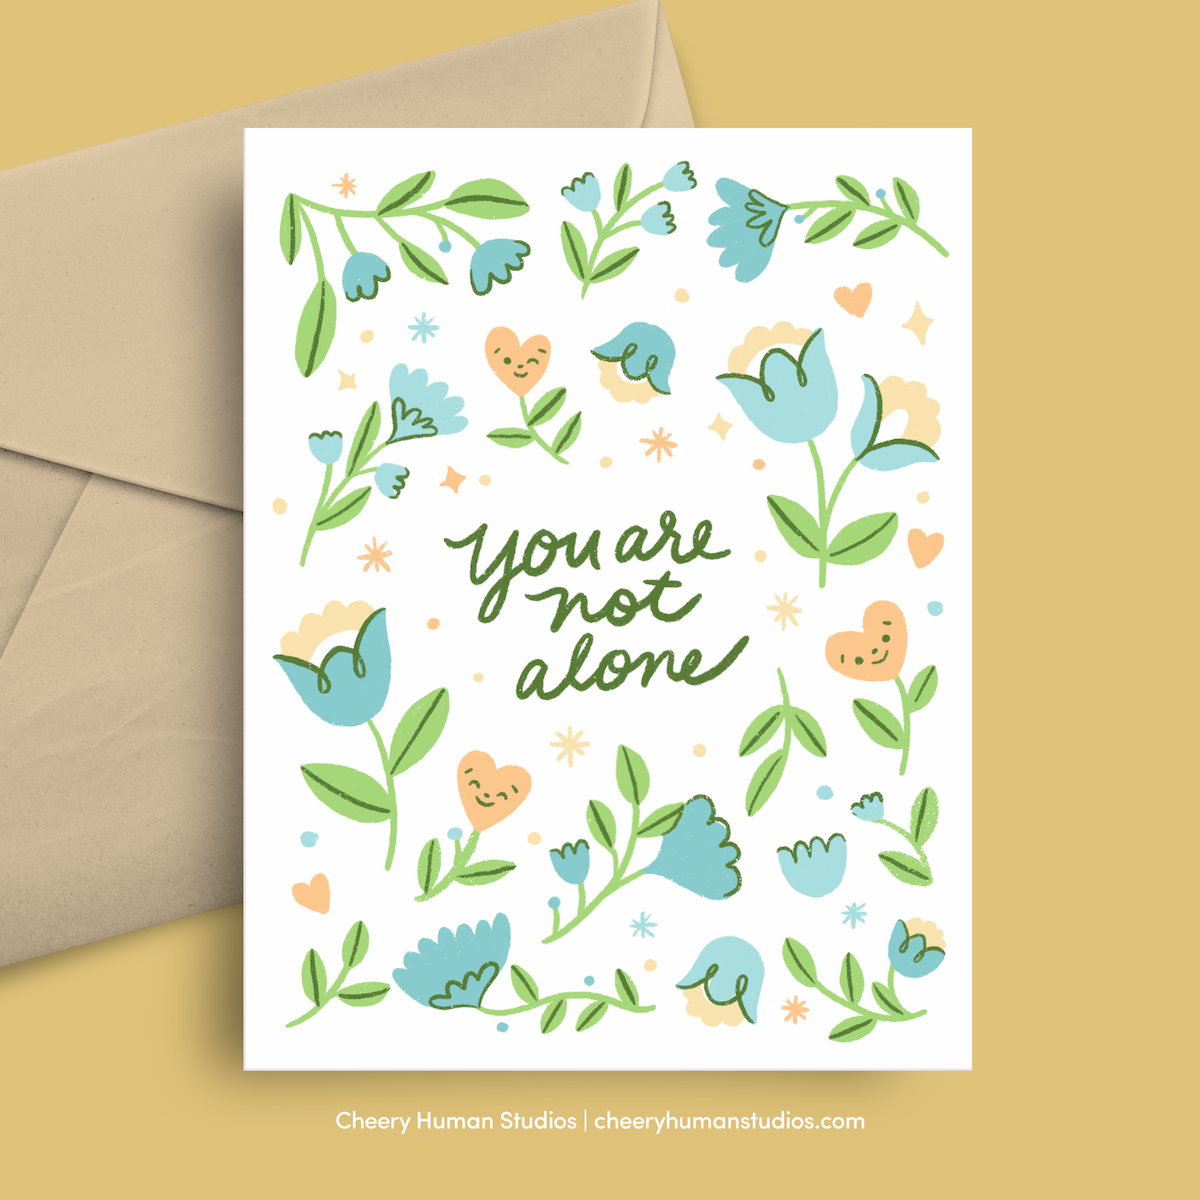 You Are Not Alone - Greeting Card  |  Everyday Greeting Card | Just Because Greeting Card | Thinking of You Greeting Card